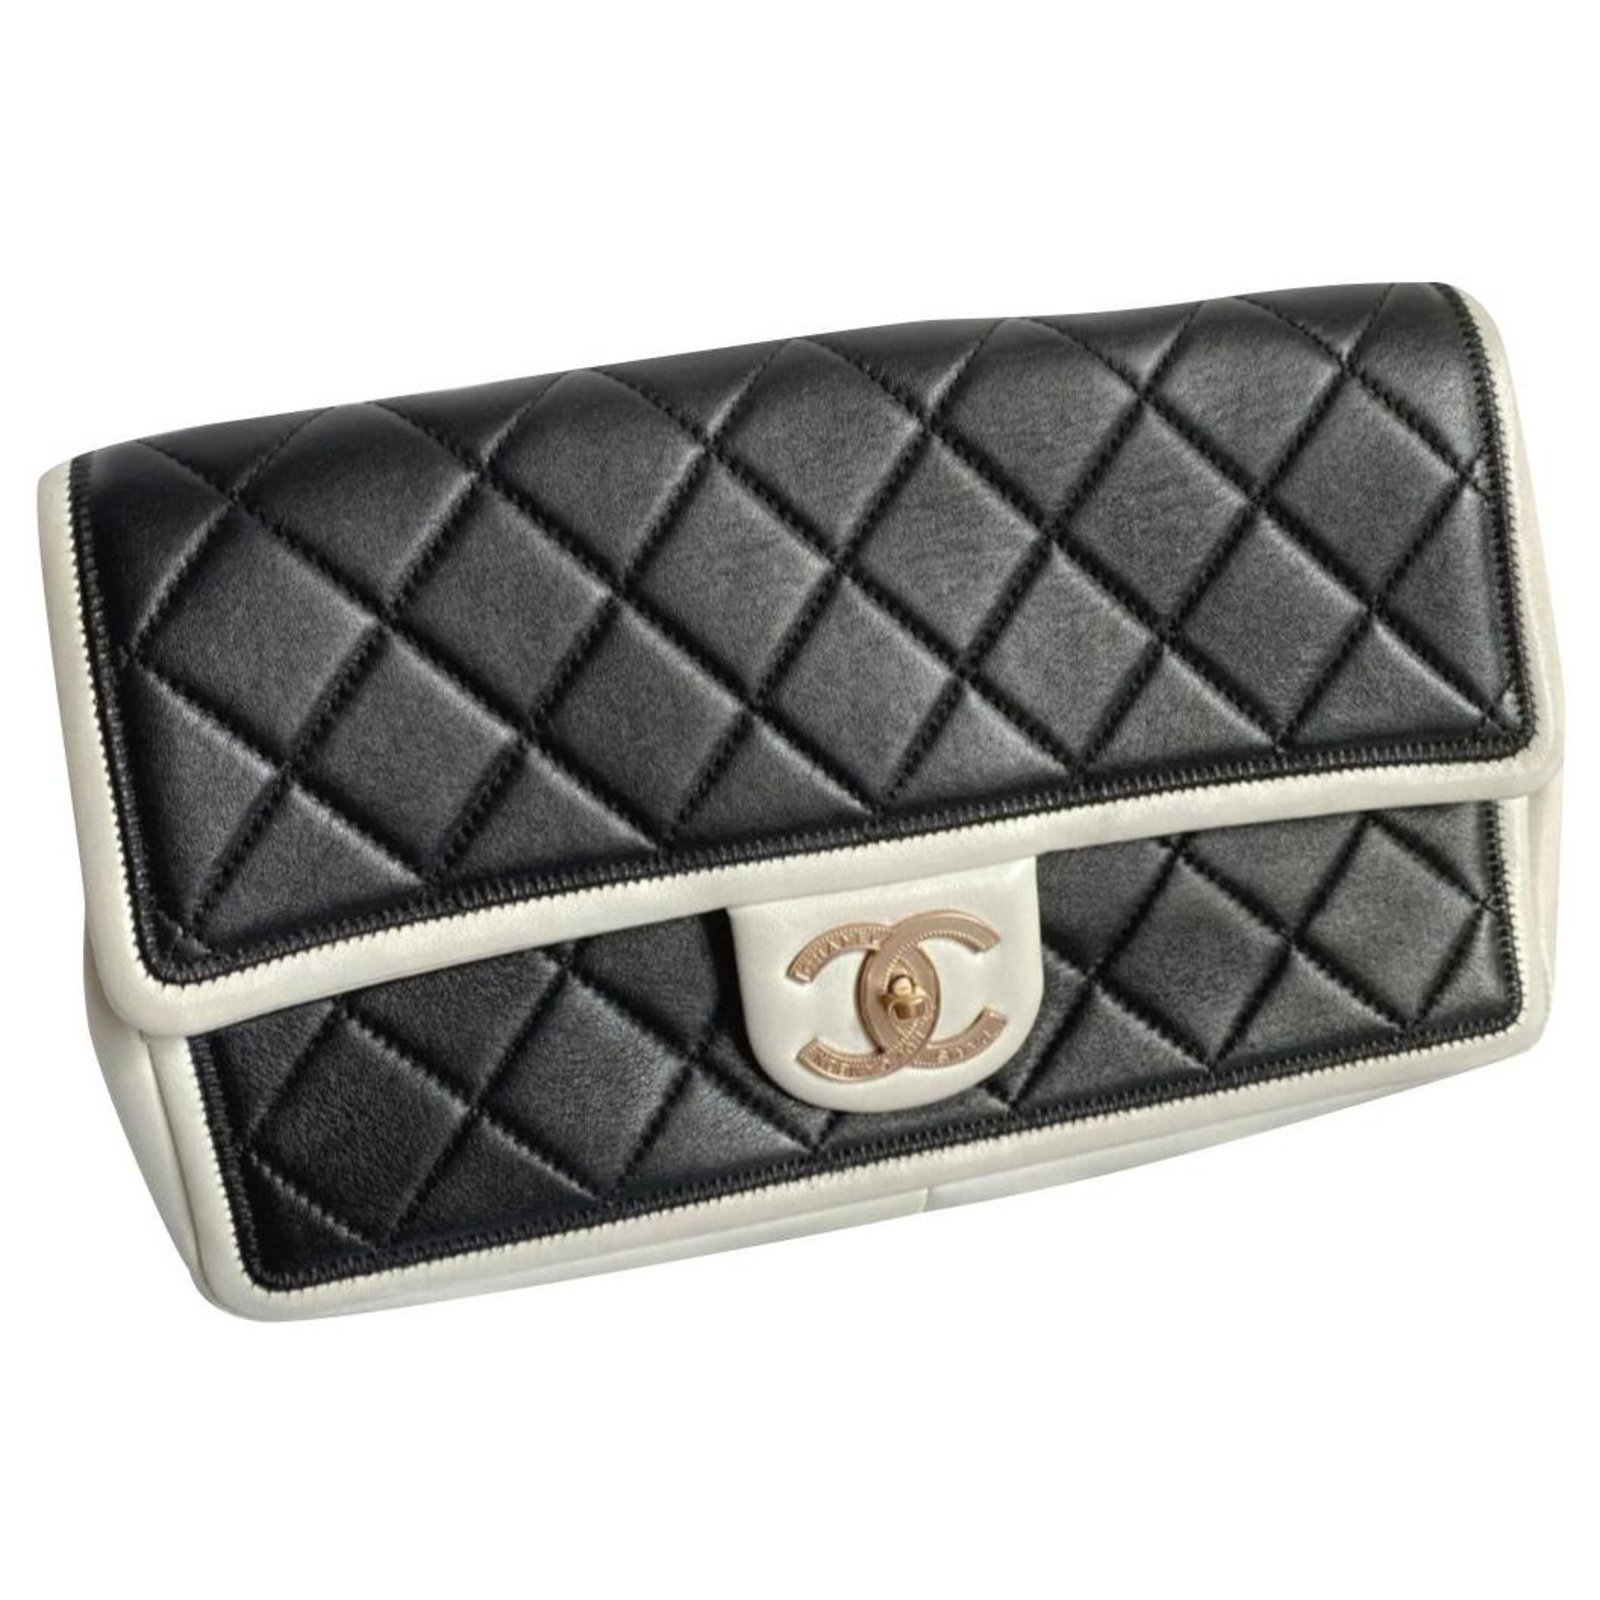 Chanel Limited edition black and beige flap bag